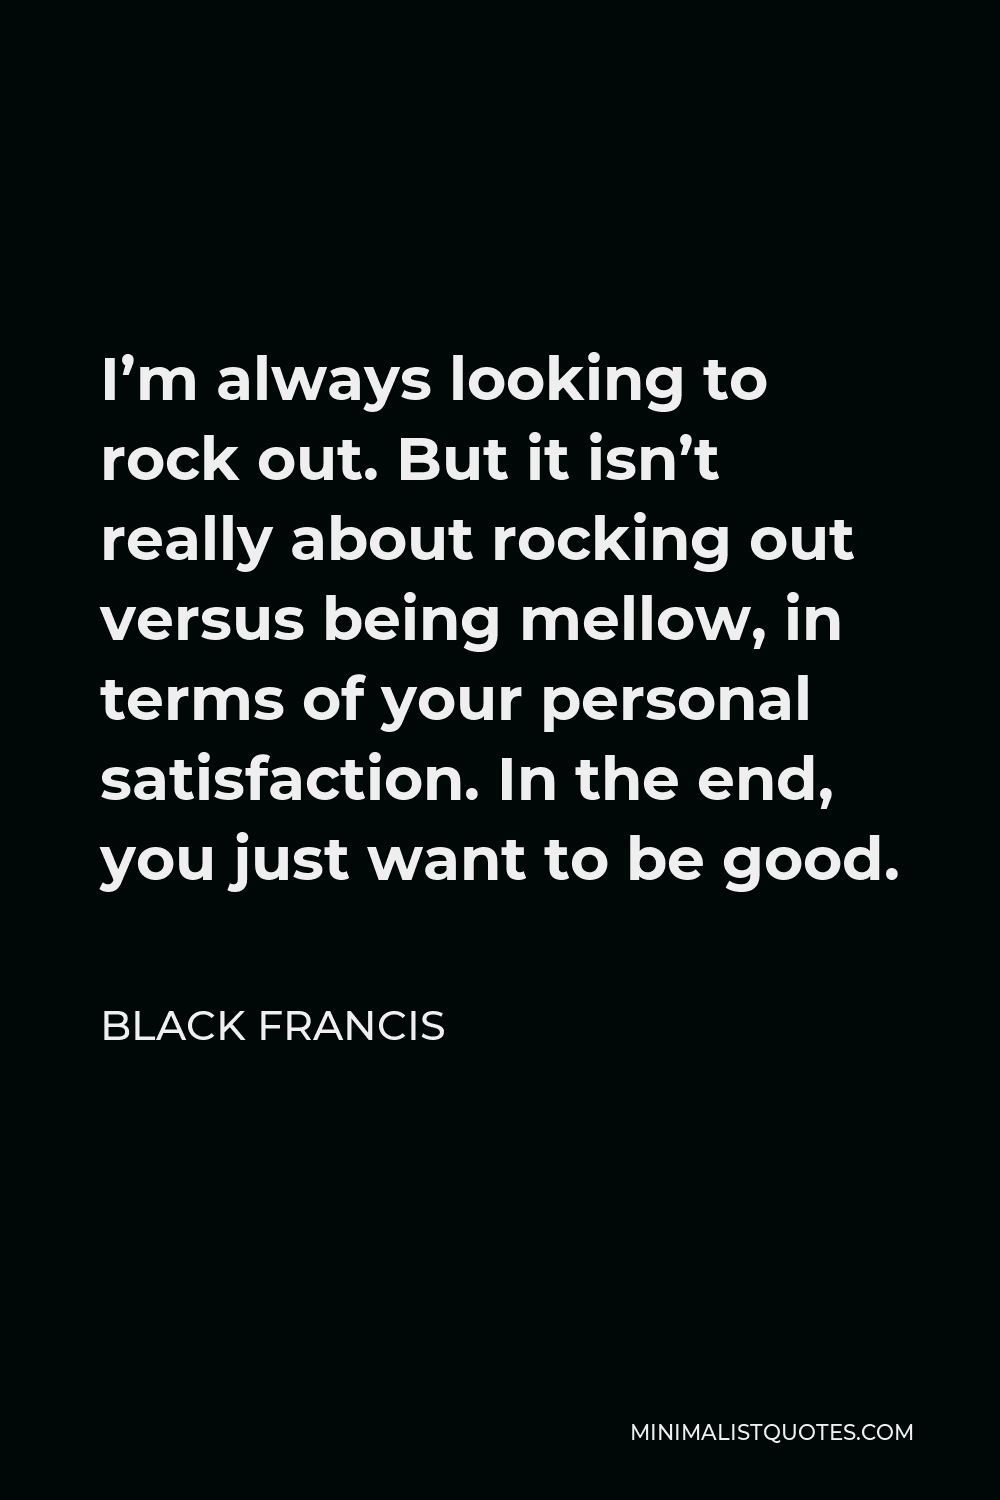 Black Francis Quote - I’m always looking to rock out. But it isn’t really about rocking out versus being mellow, in terms of your personal satisfaction. In the end, you just want to be good.